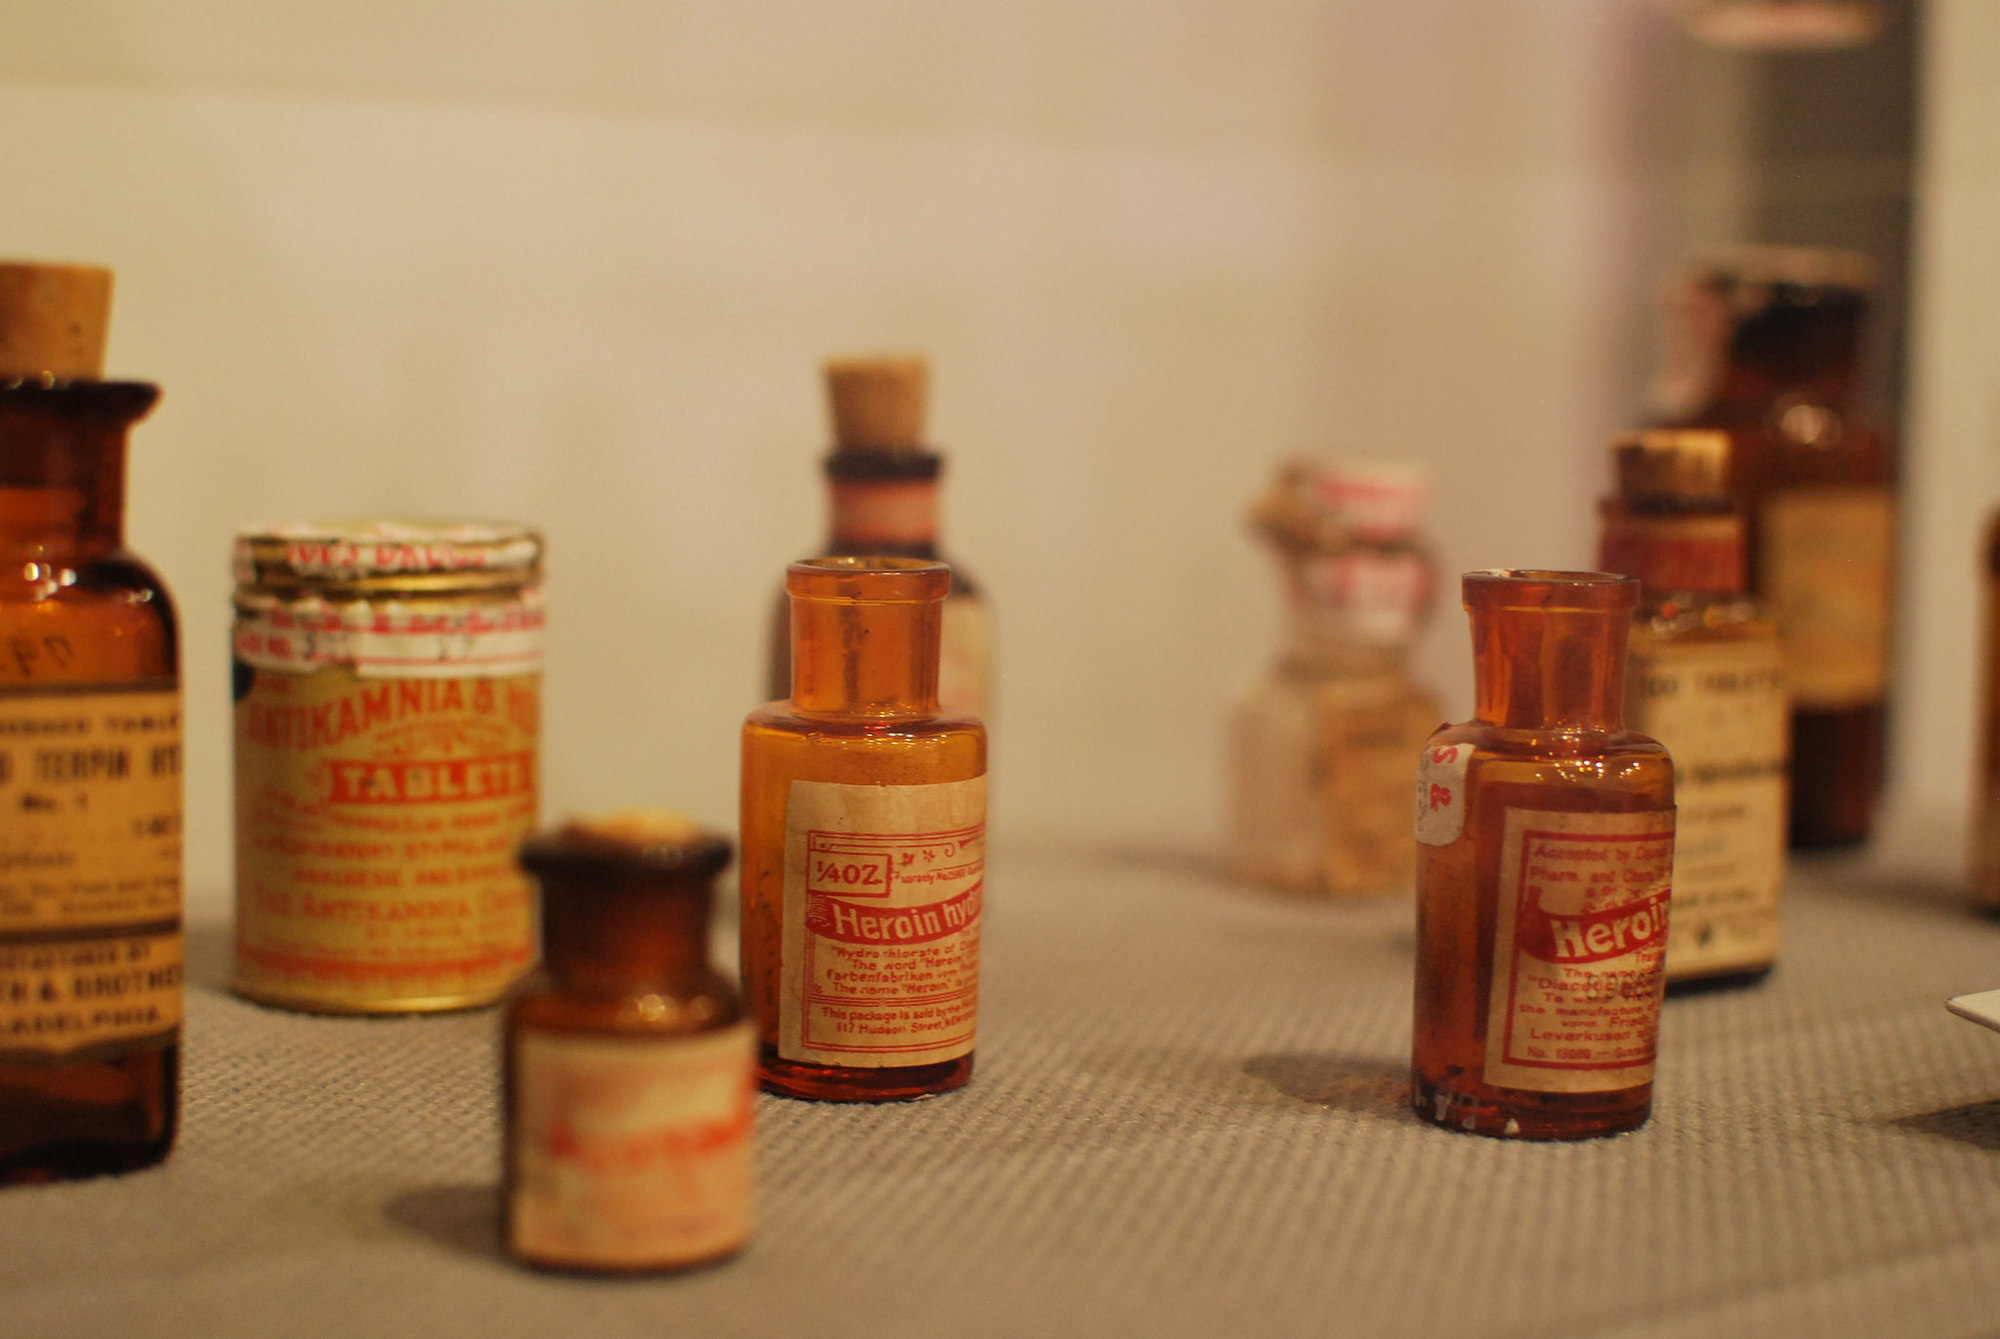 Heroin was once a perfectly acceptable medicine prescribed by doctors for common ailments like coughs to headaches.